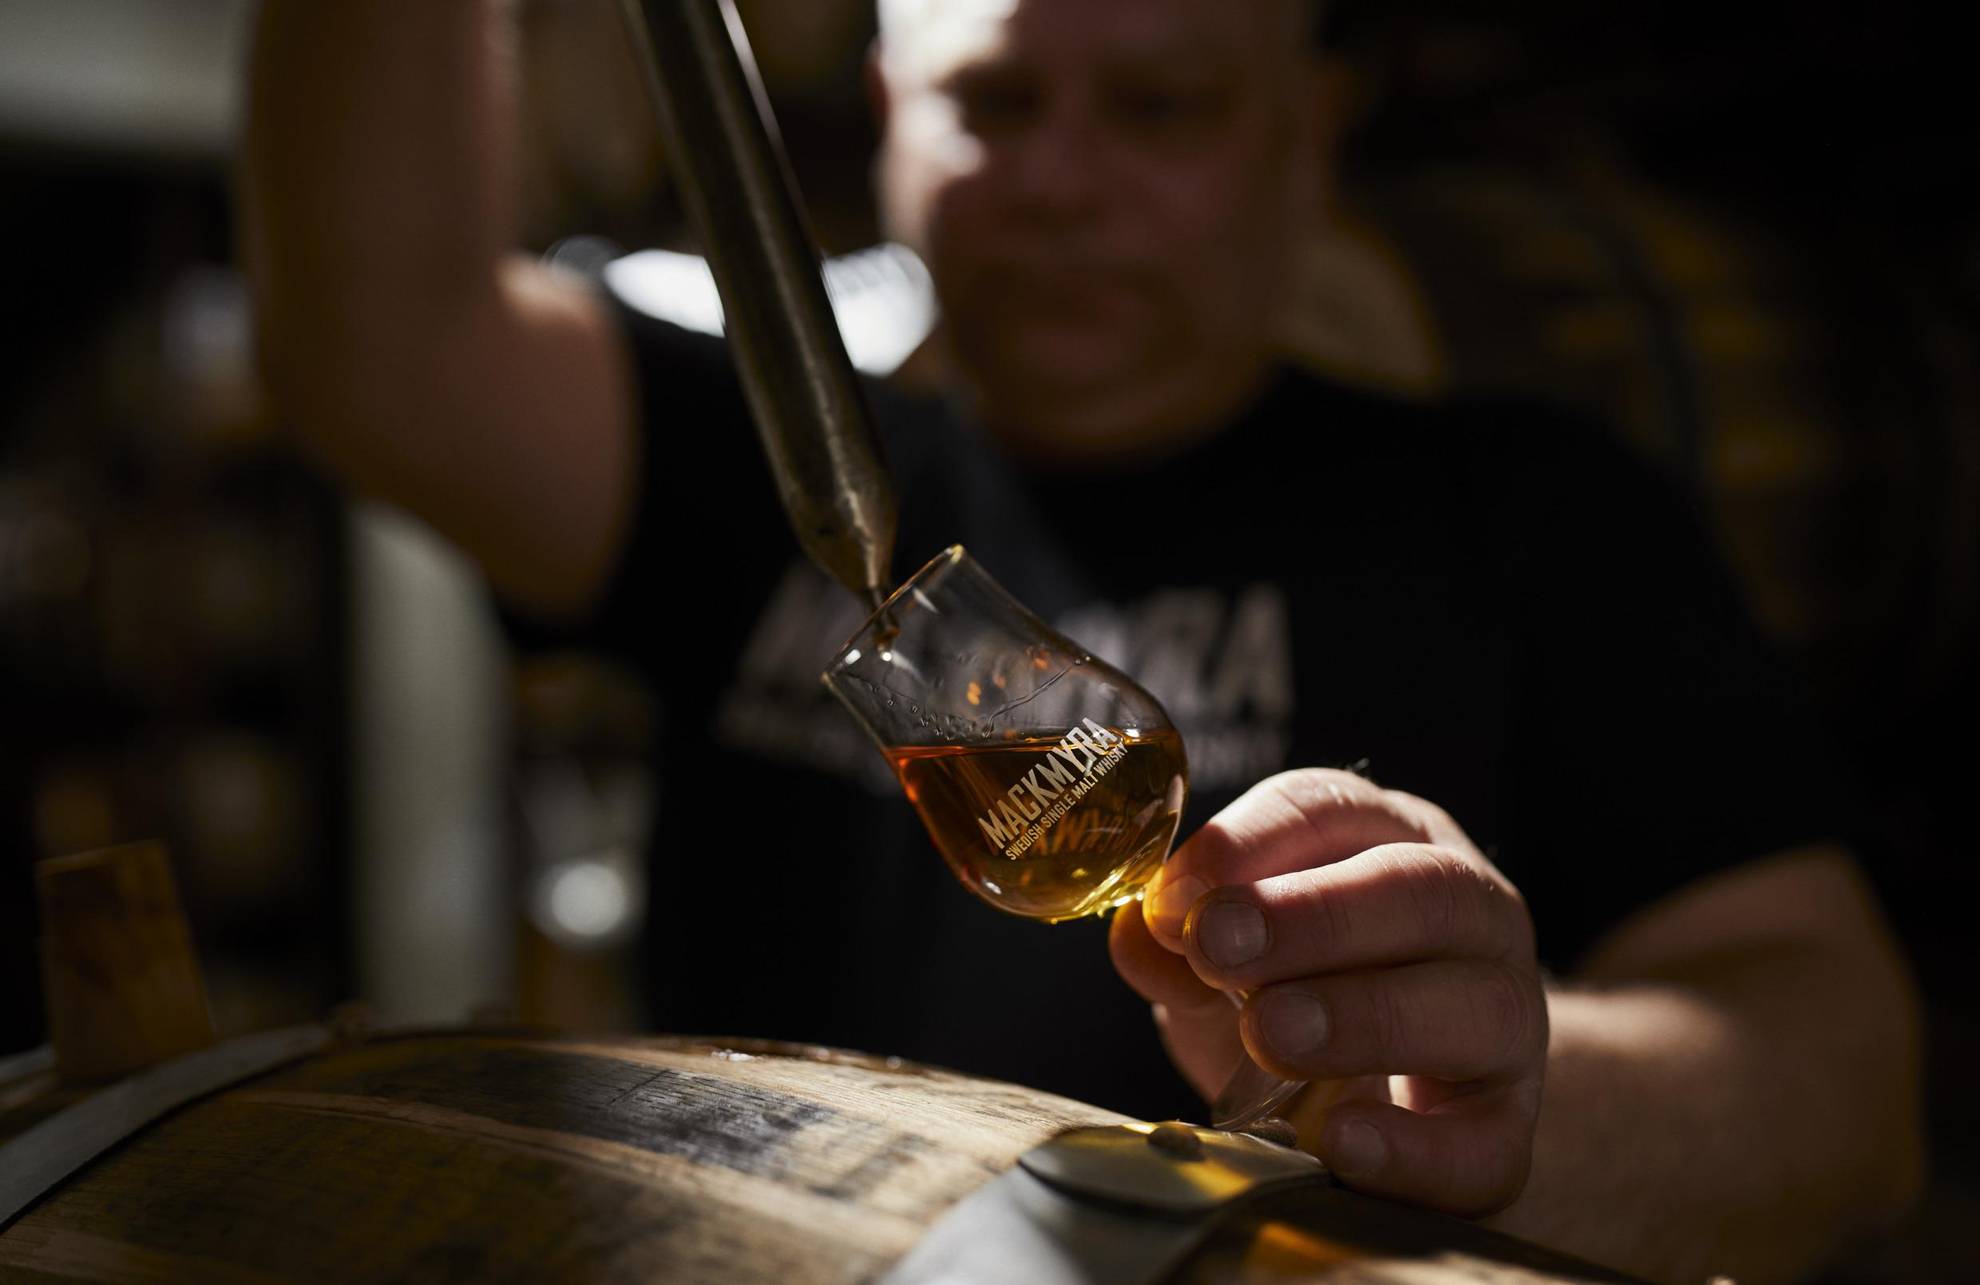 Whisky is poured from a pipette into a whisky glass with the text Mackmyra on it. An oak barrel is in the foreground.